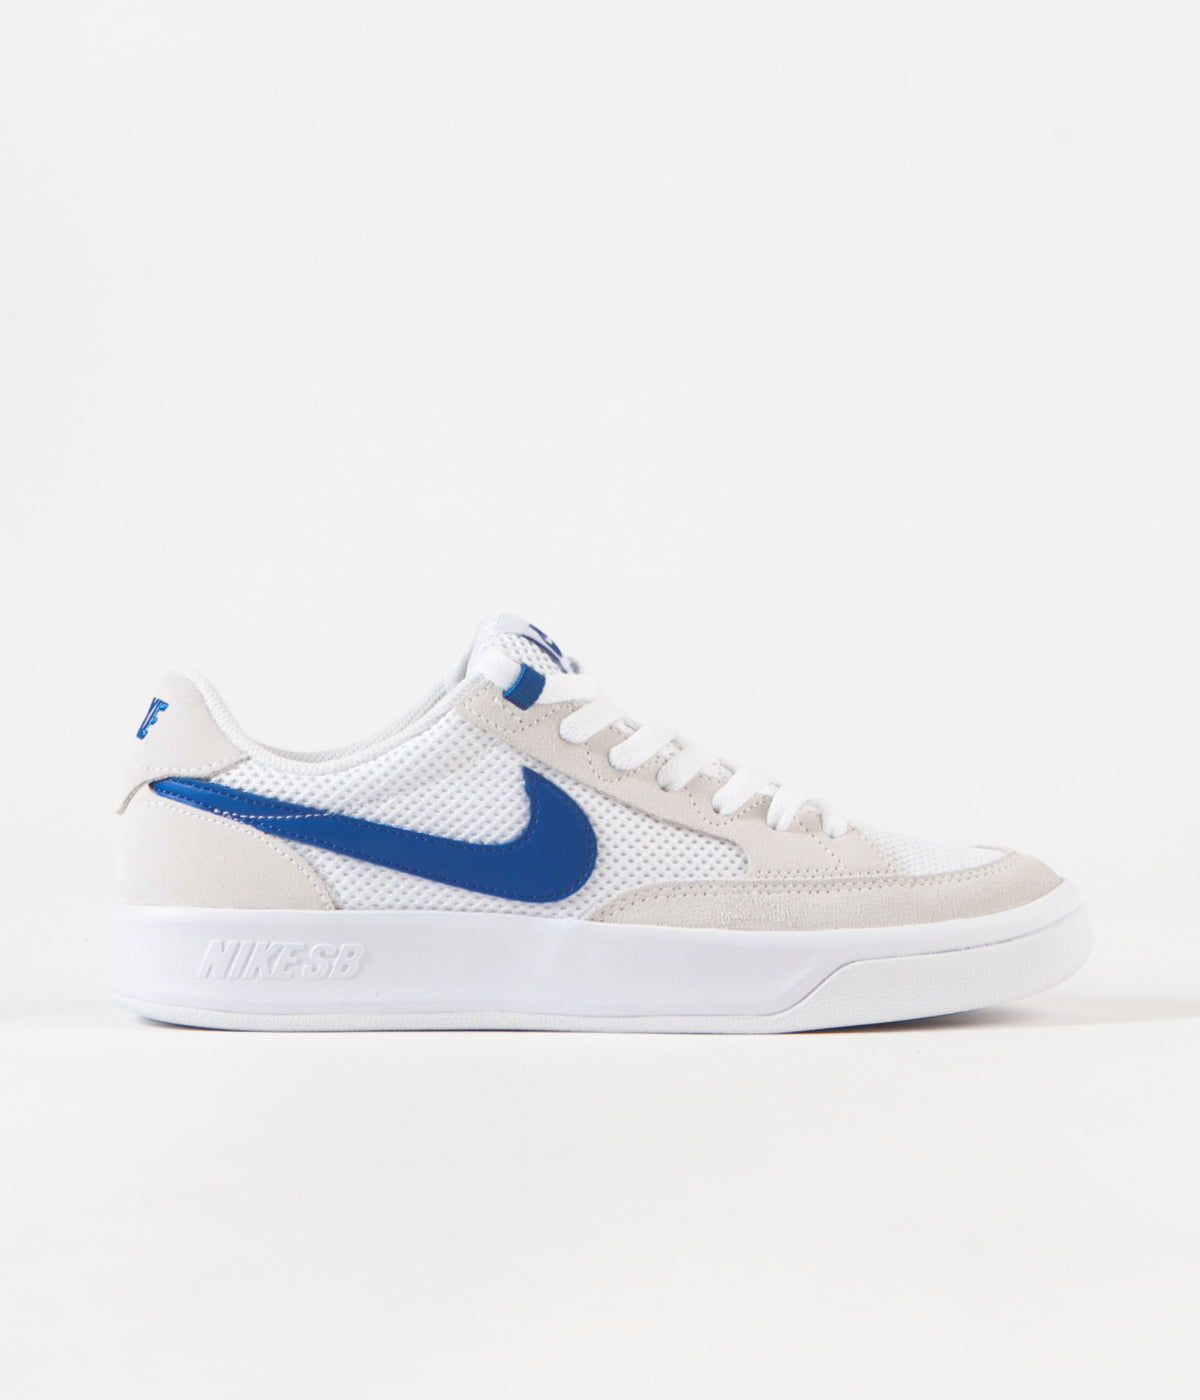 nike blue and white shoes